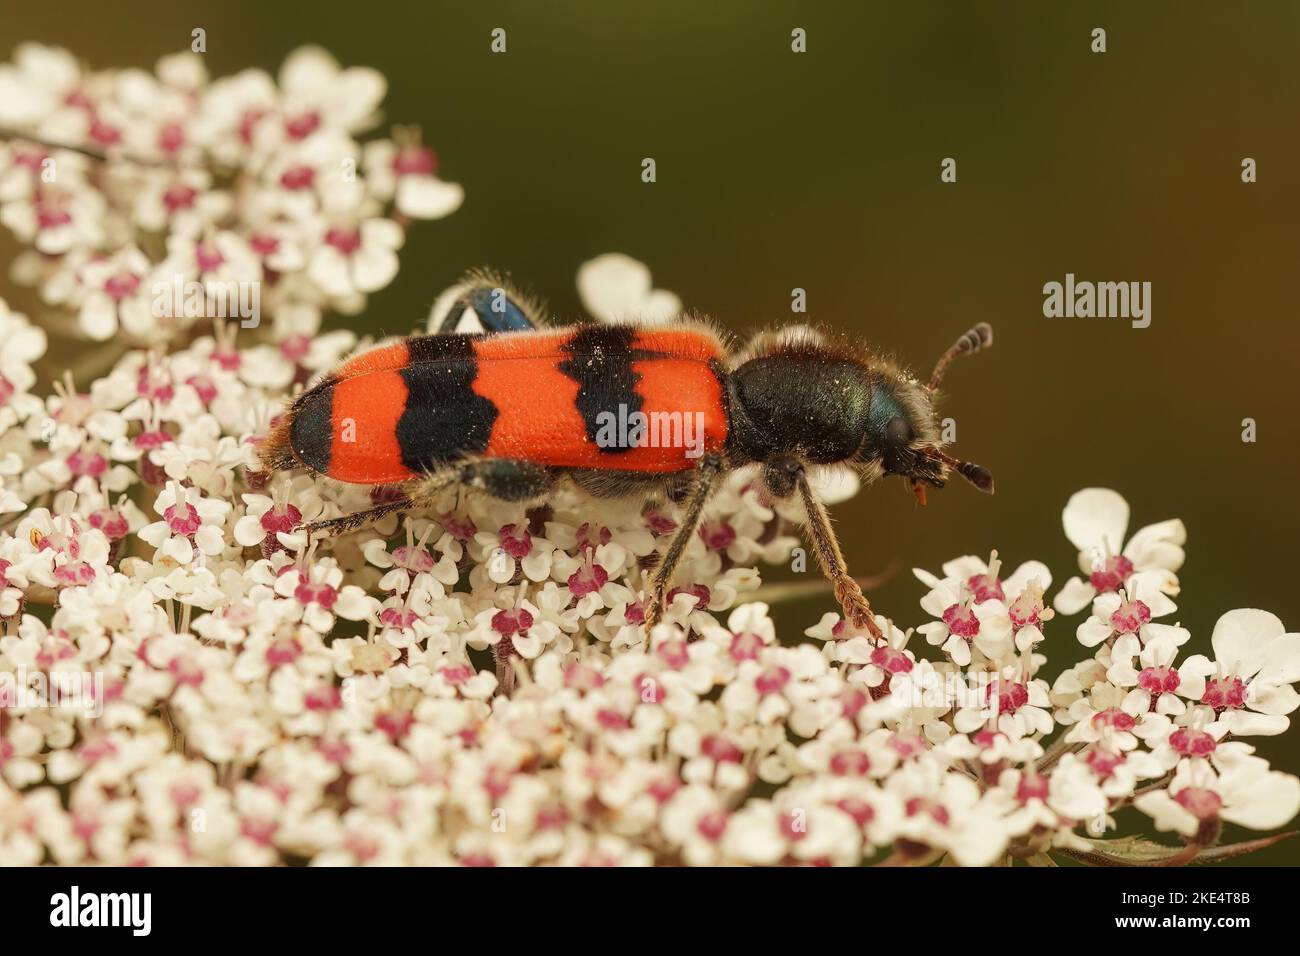 A closeup of a beetle (Trichodes apiarius) on a nest of bees Stock Photo